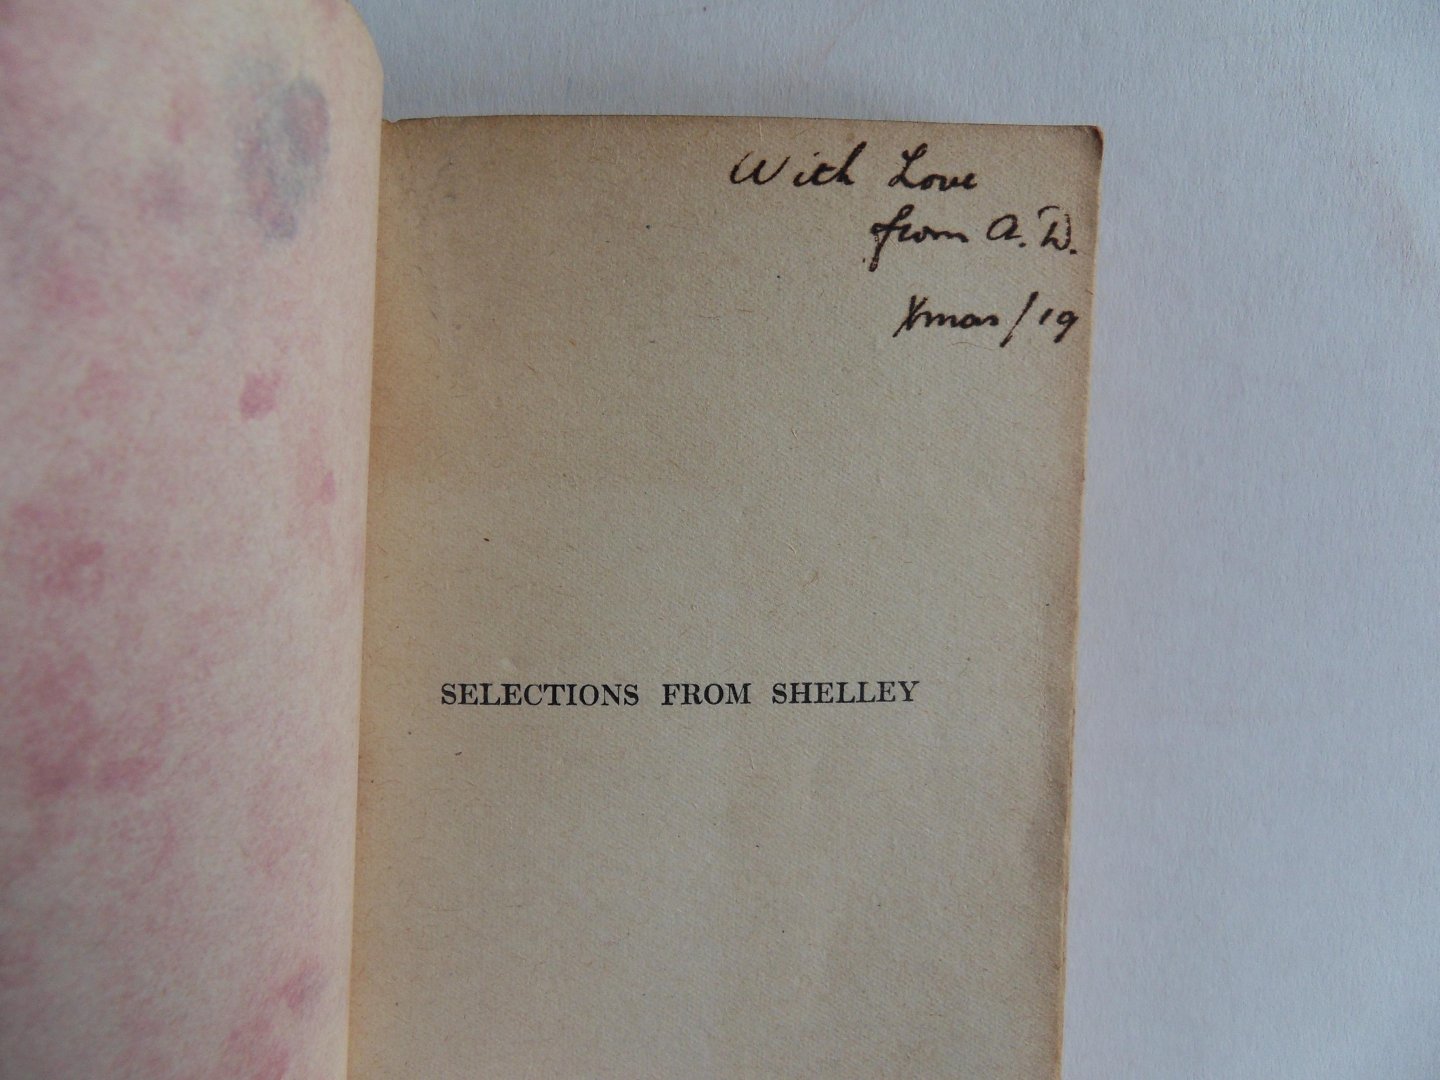 Landells, William M.A. - Selections from Shelley.